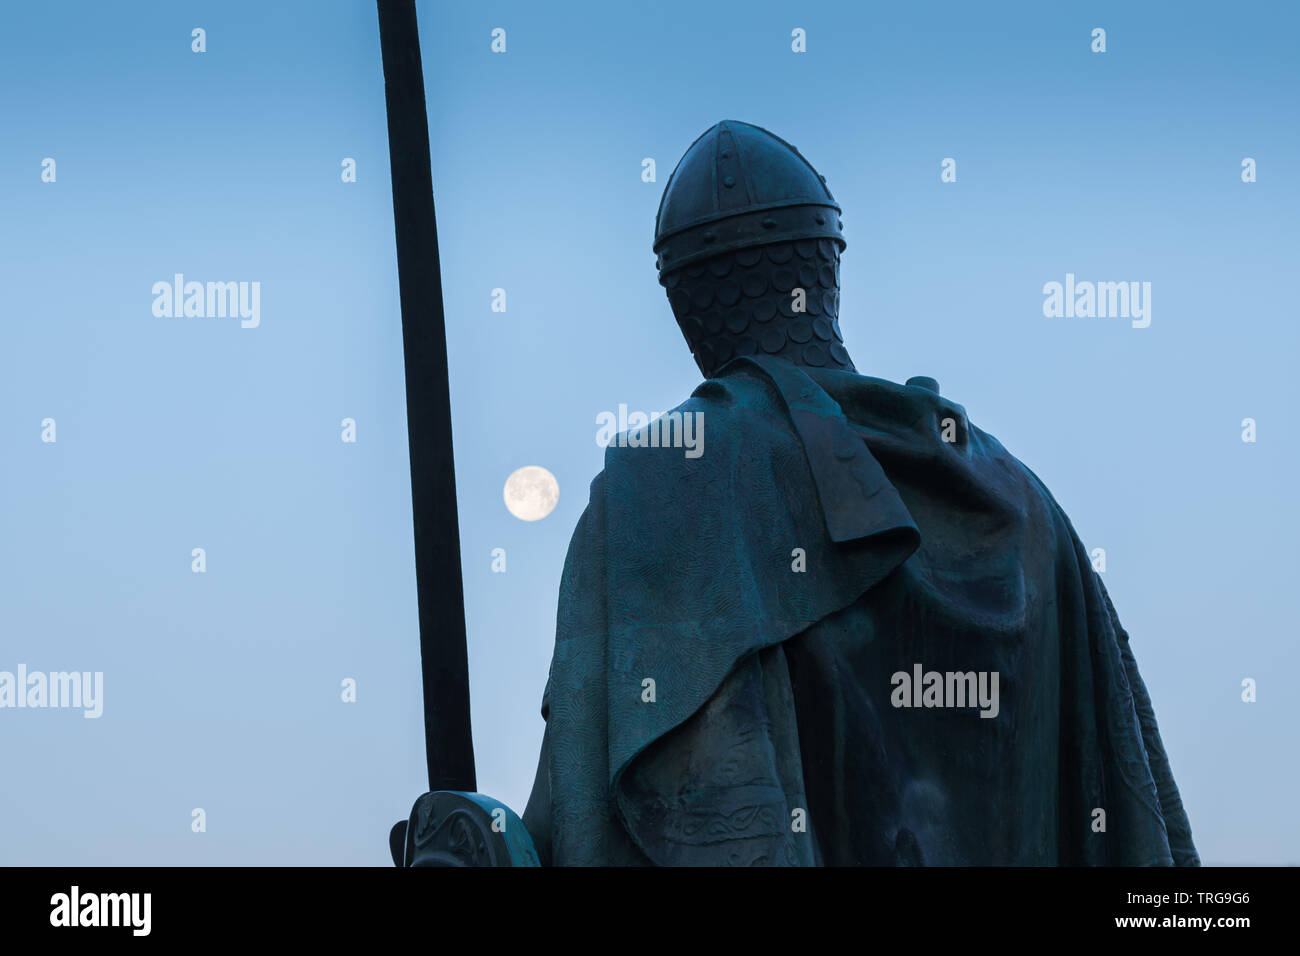 The full moon and statue of King Afonso I in front of the Castle, Guimarães, Braga, Portugal Stock Photo